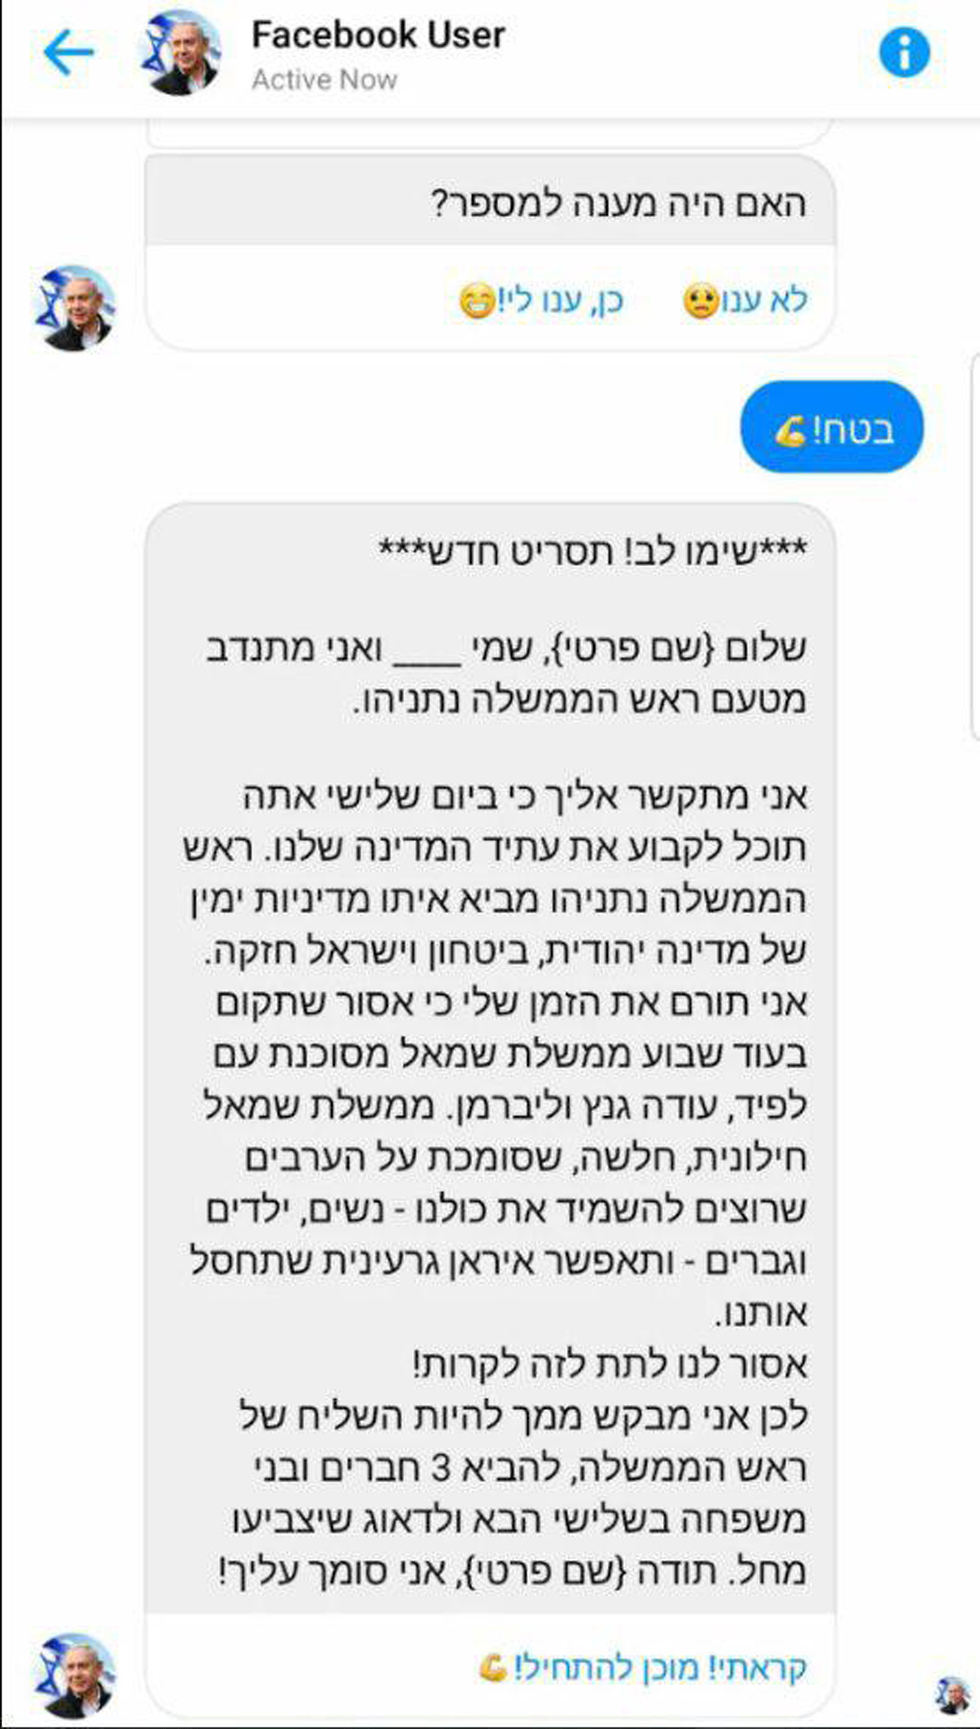 The Facebook message sent by the bot in Hebrew